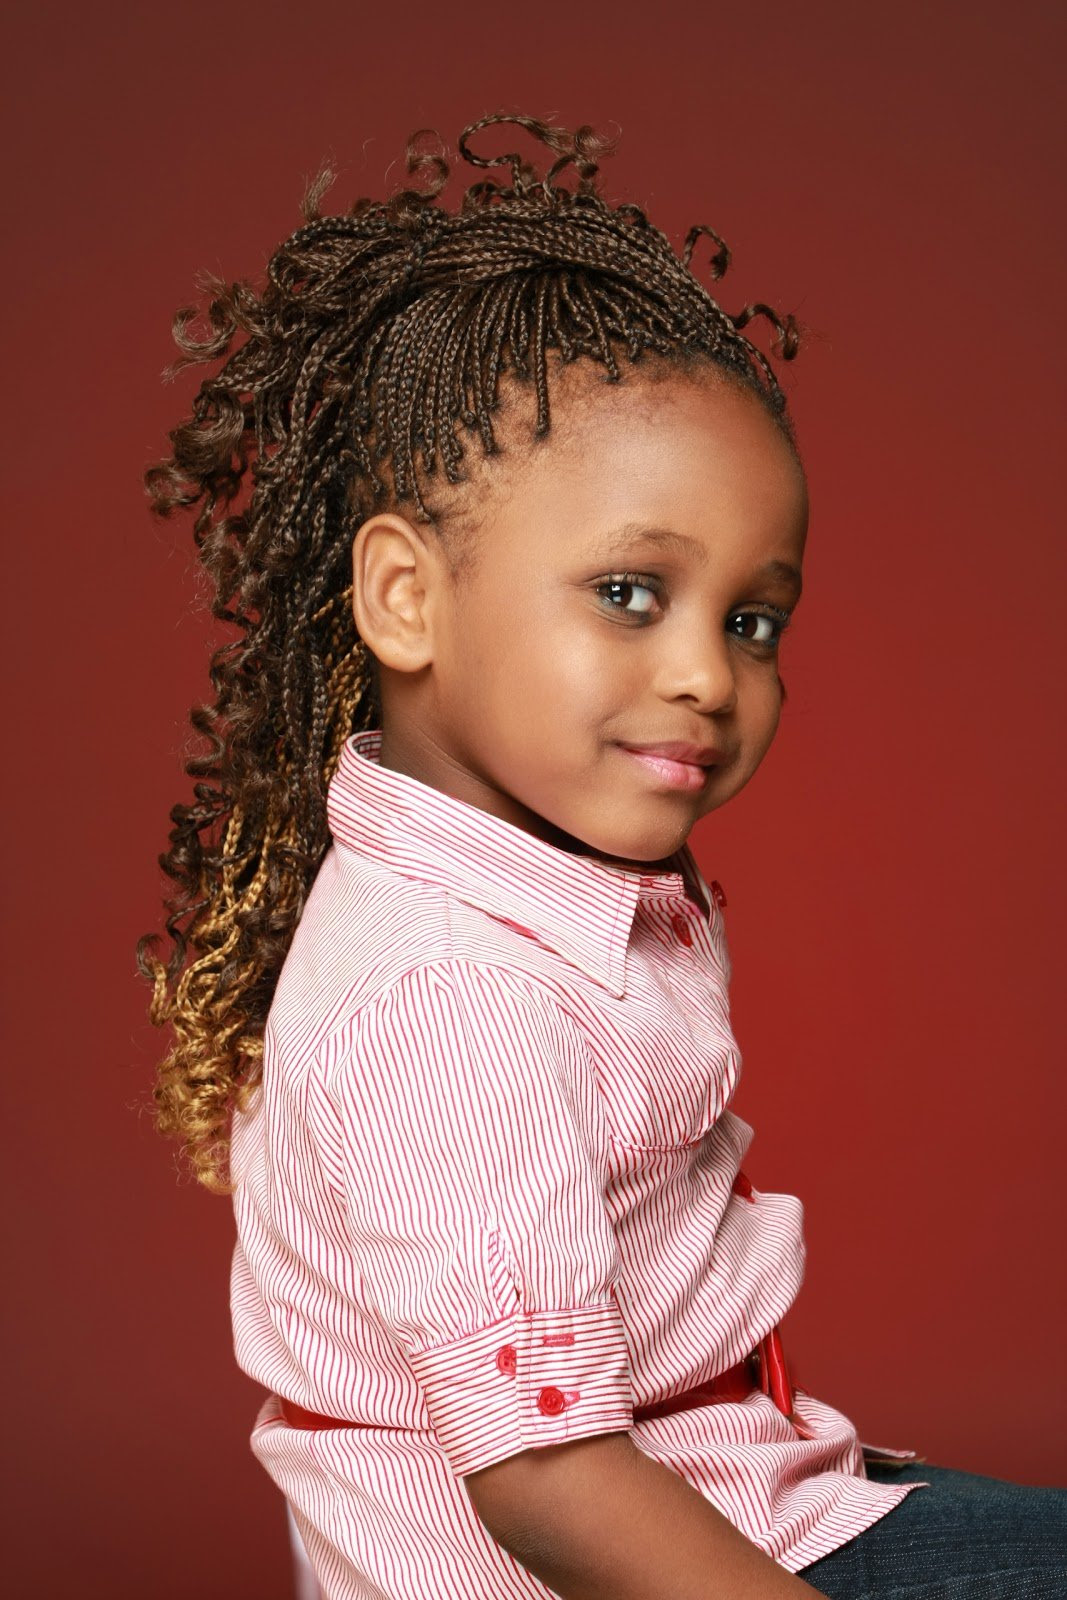 20 Hairstyles for Kids with Pictures - MagMent